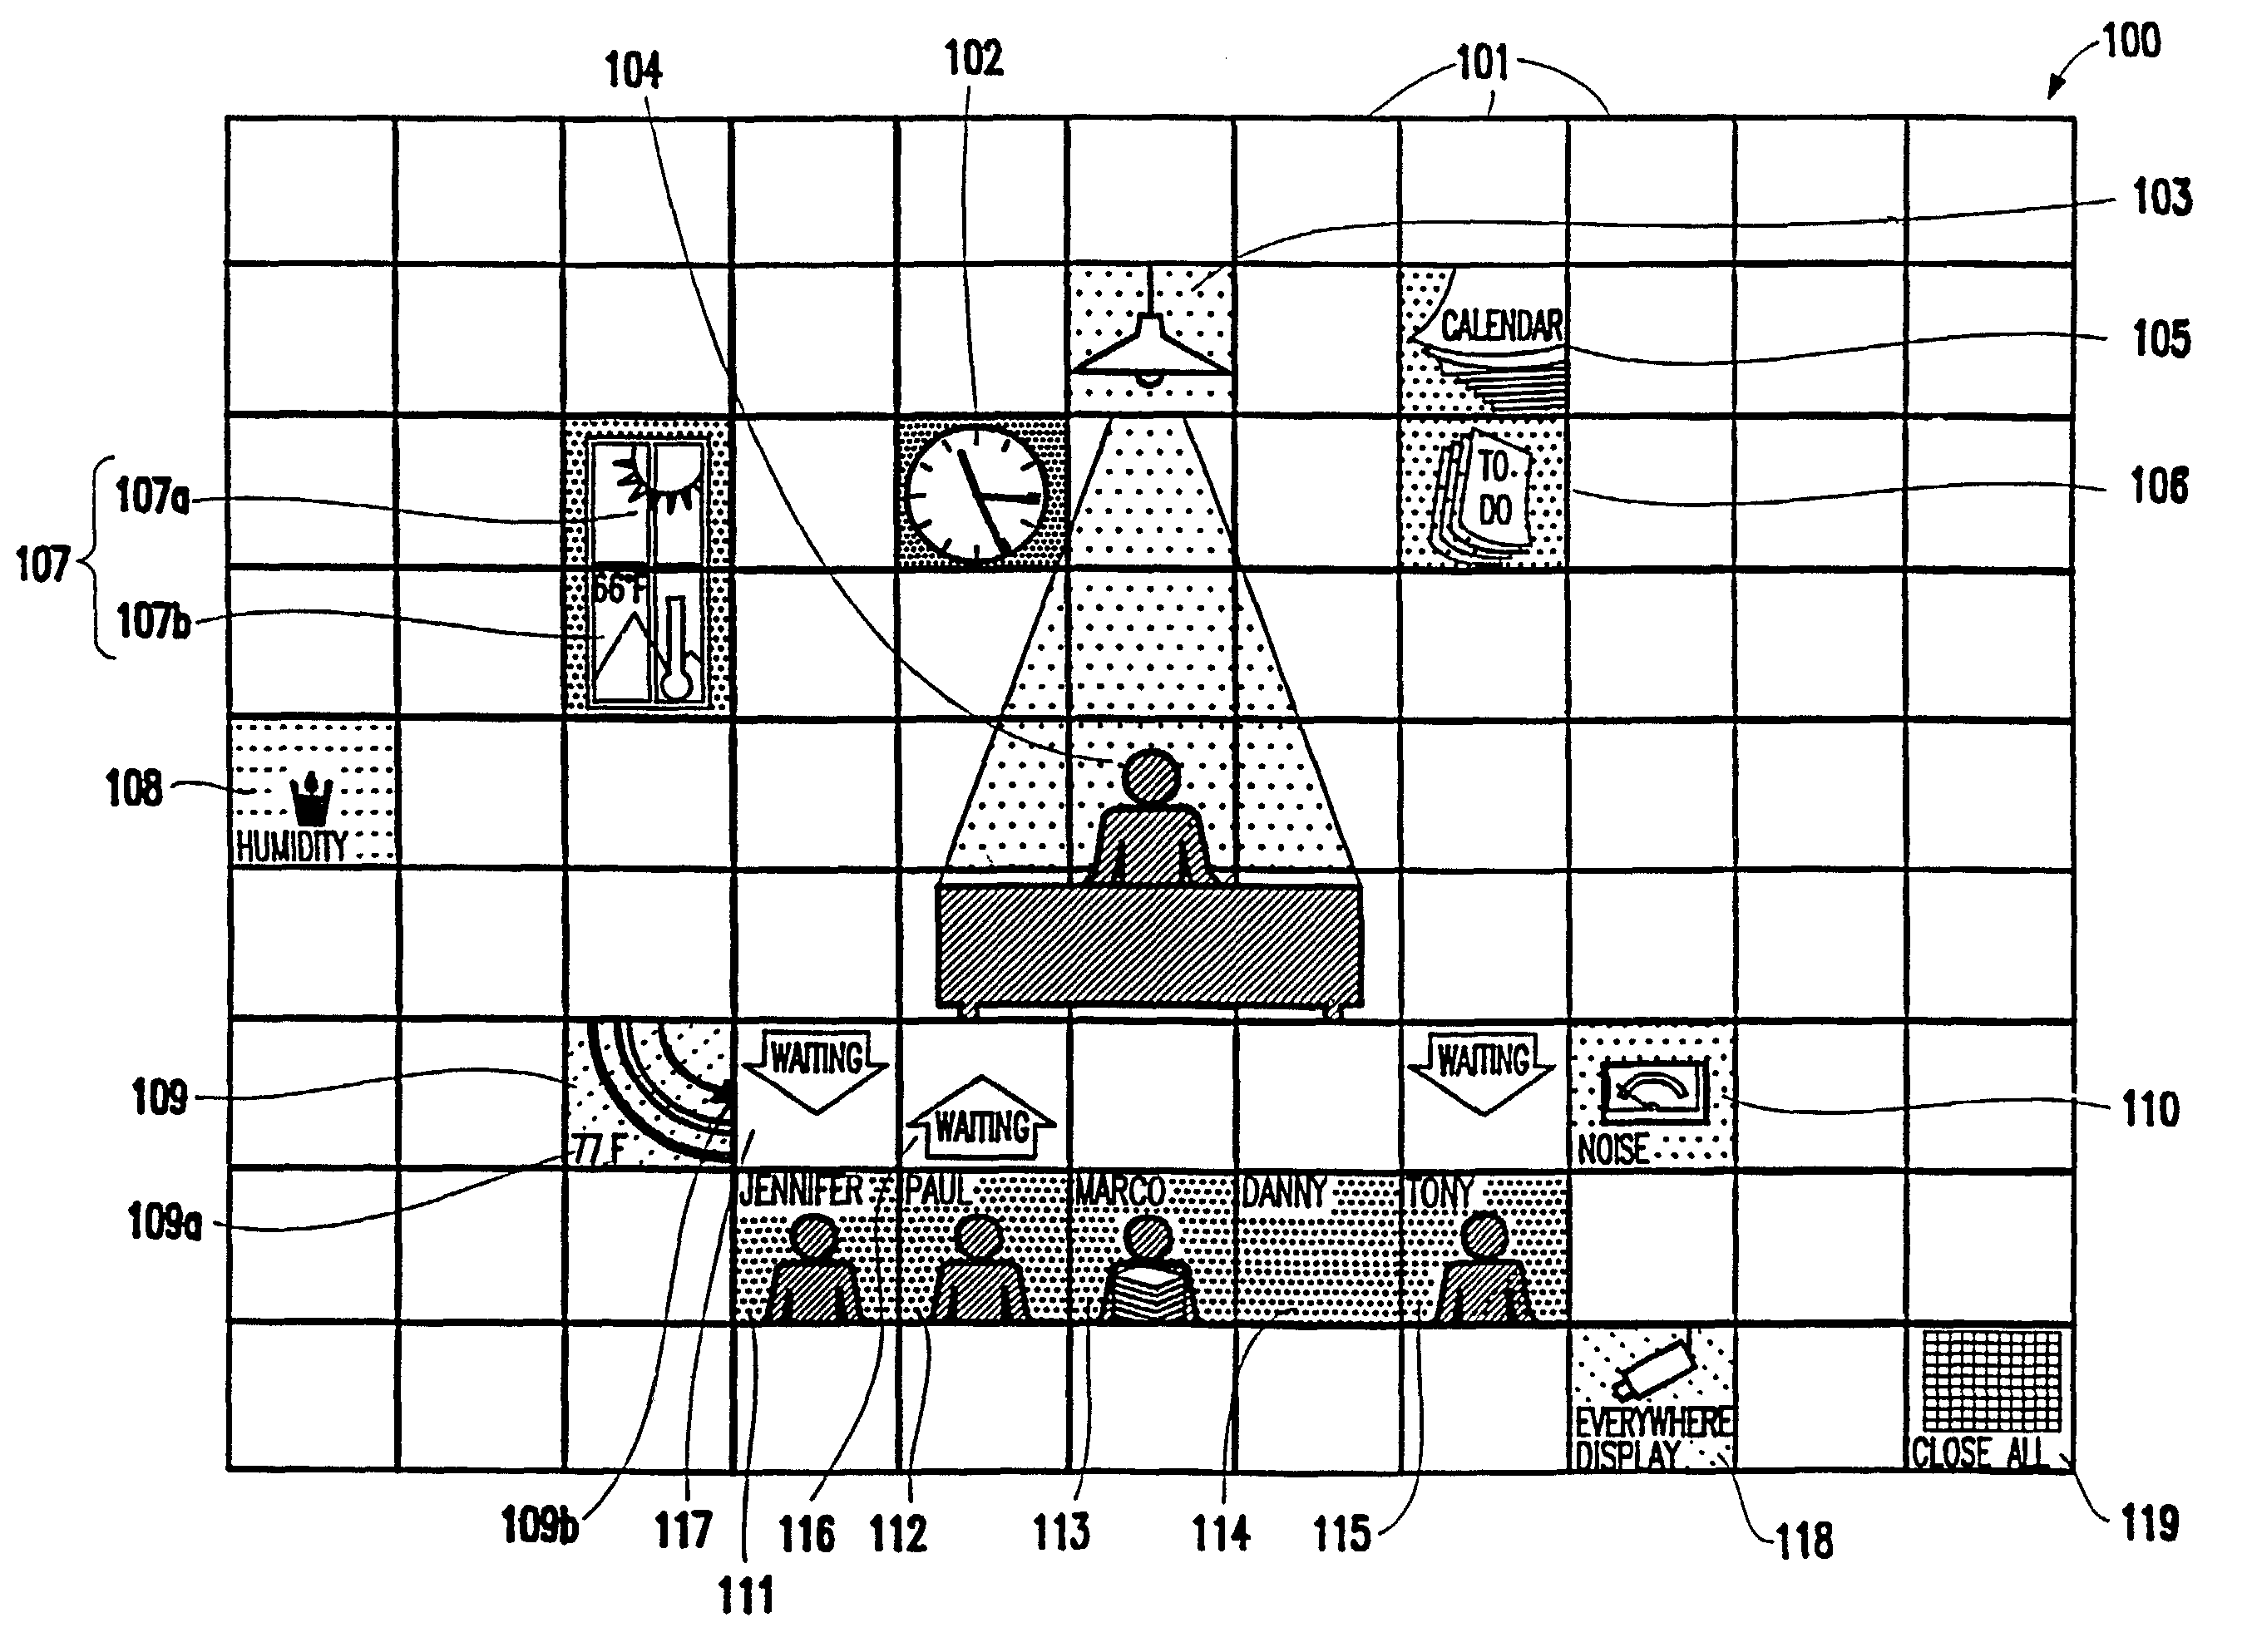 Method and system for software applications using a tiled user interface